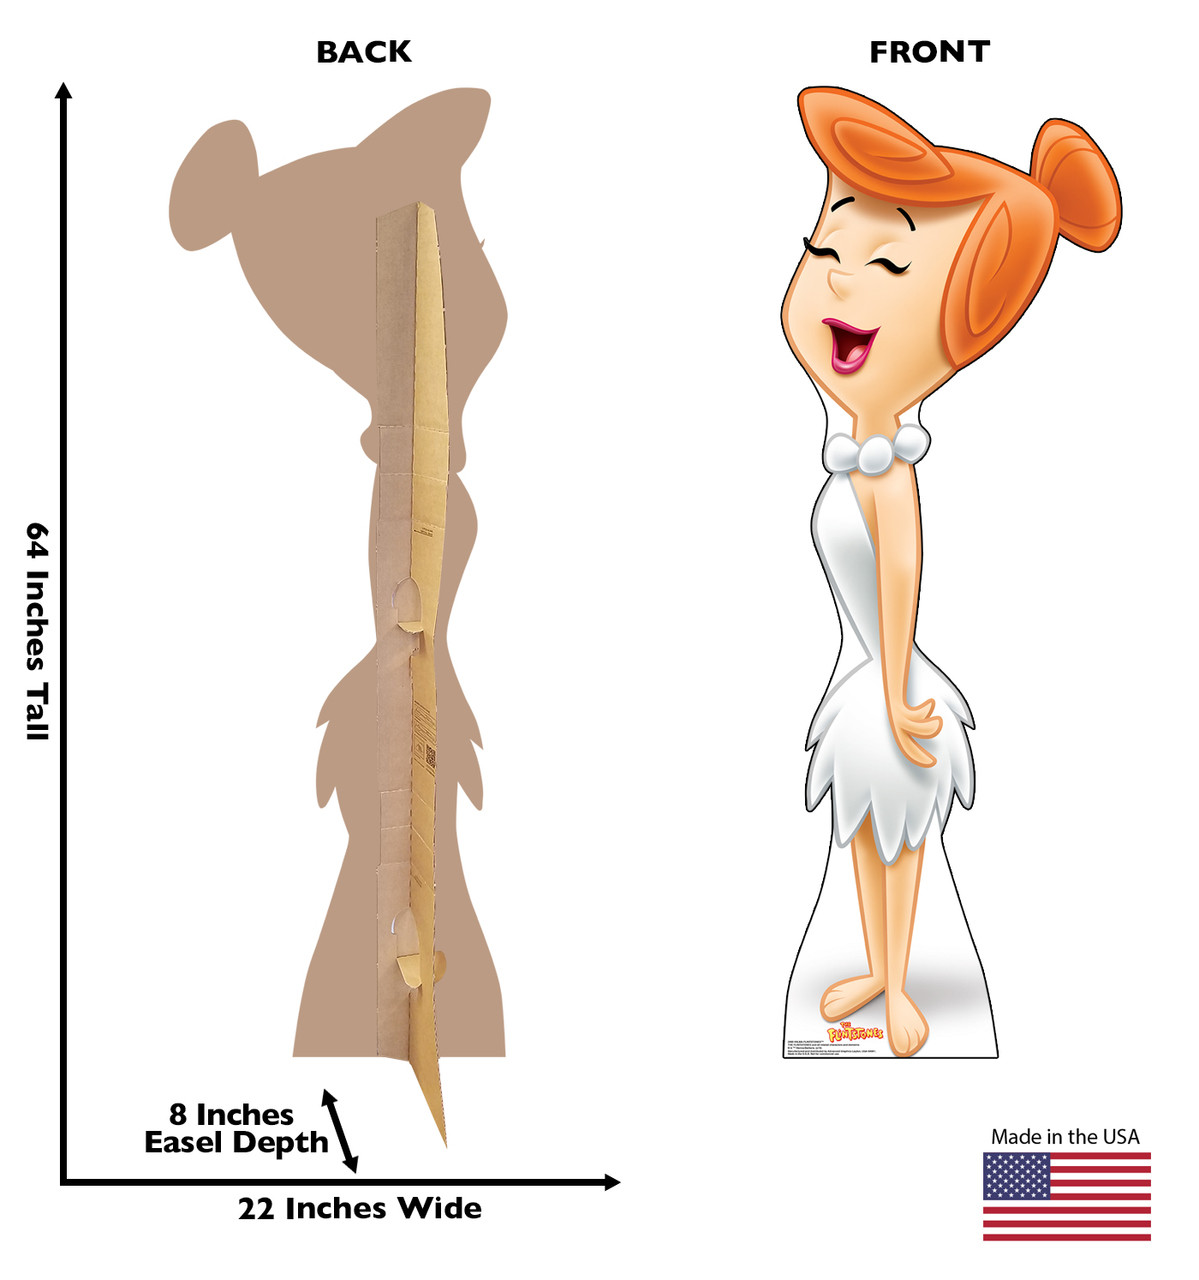 Life-size cardboard standee of Wilma Flintstone with front and back dimensions.